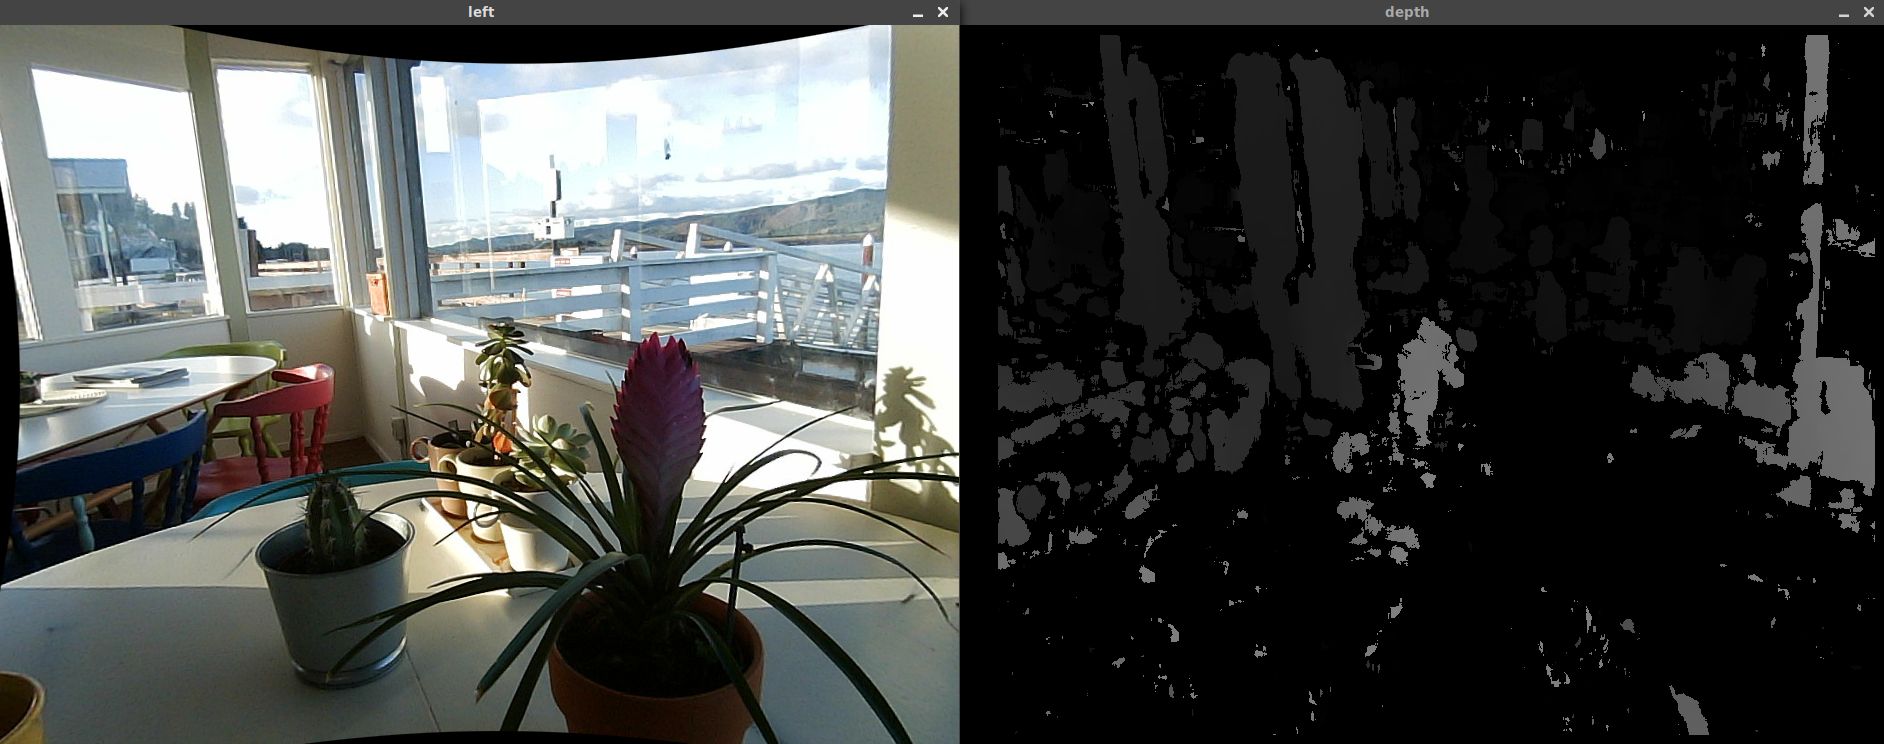 Potted plants and a noisy depth map